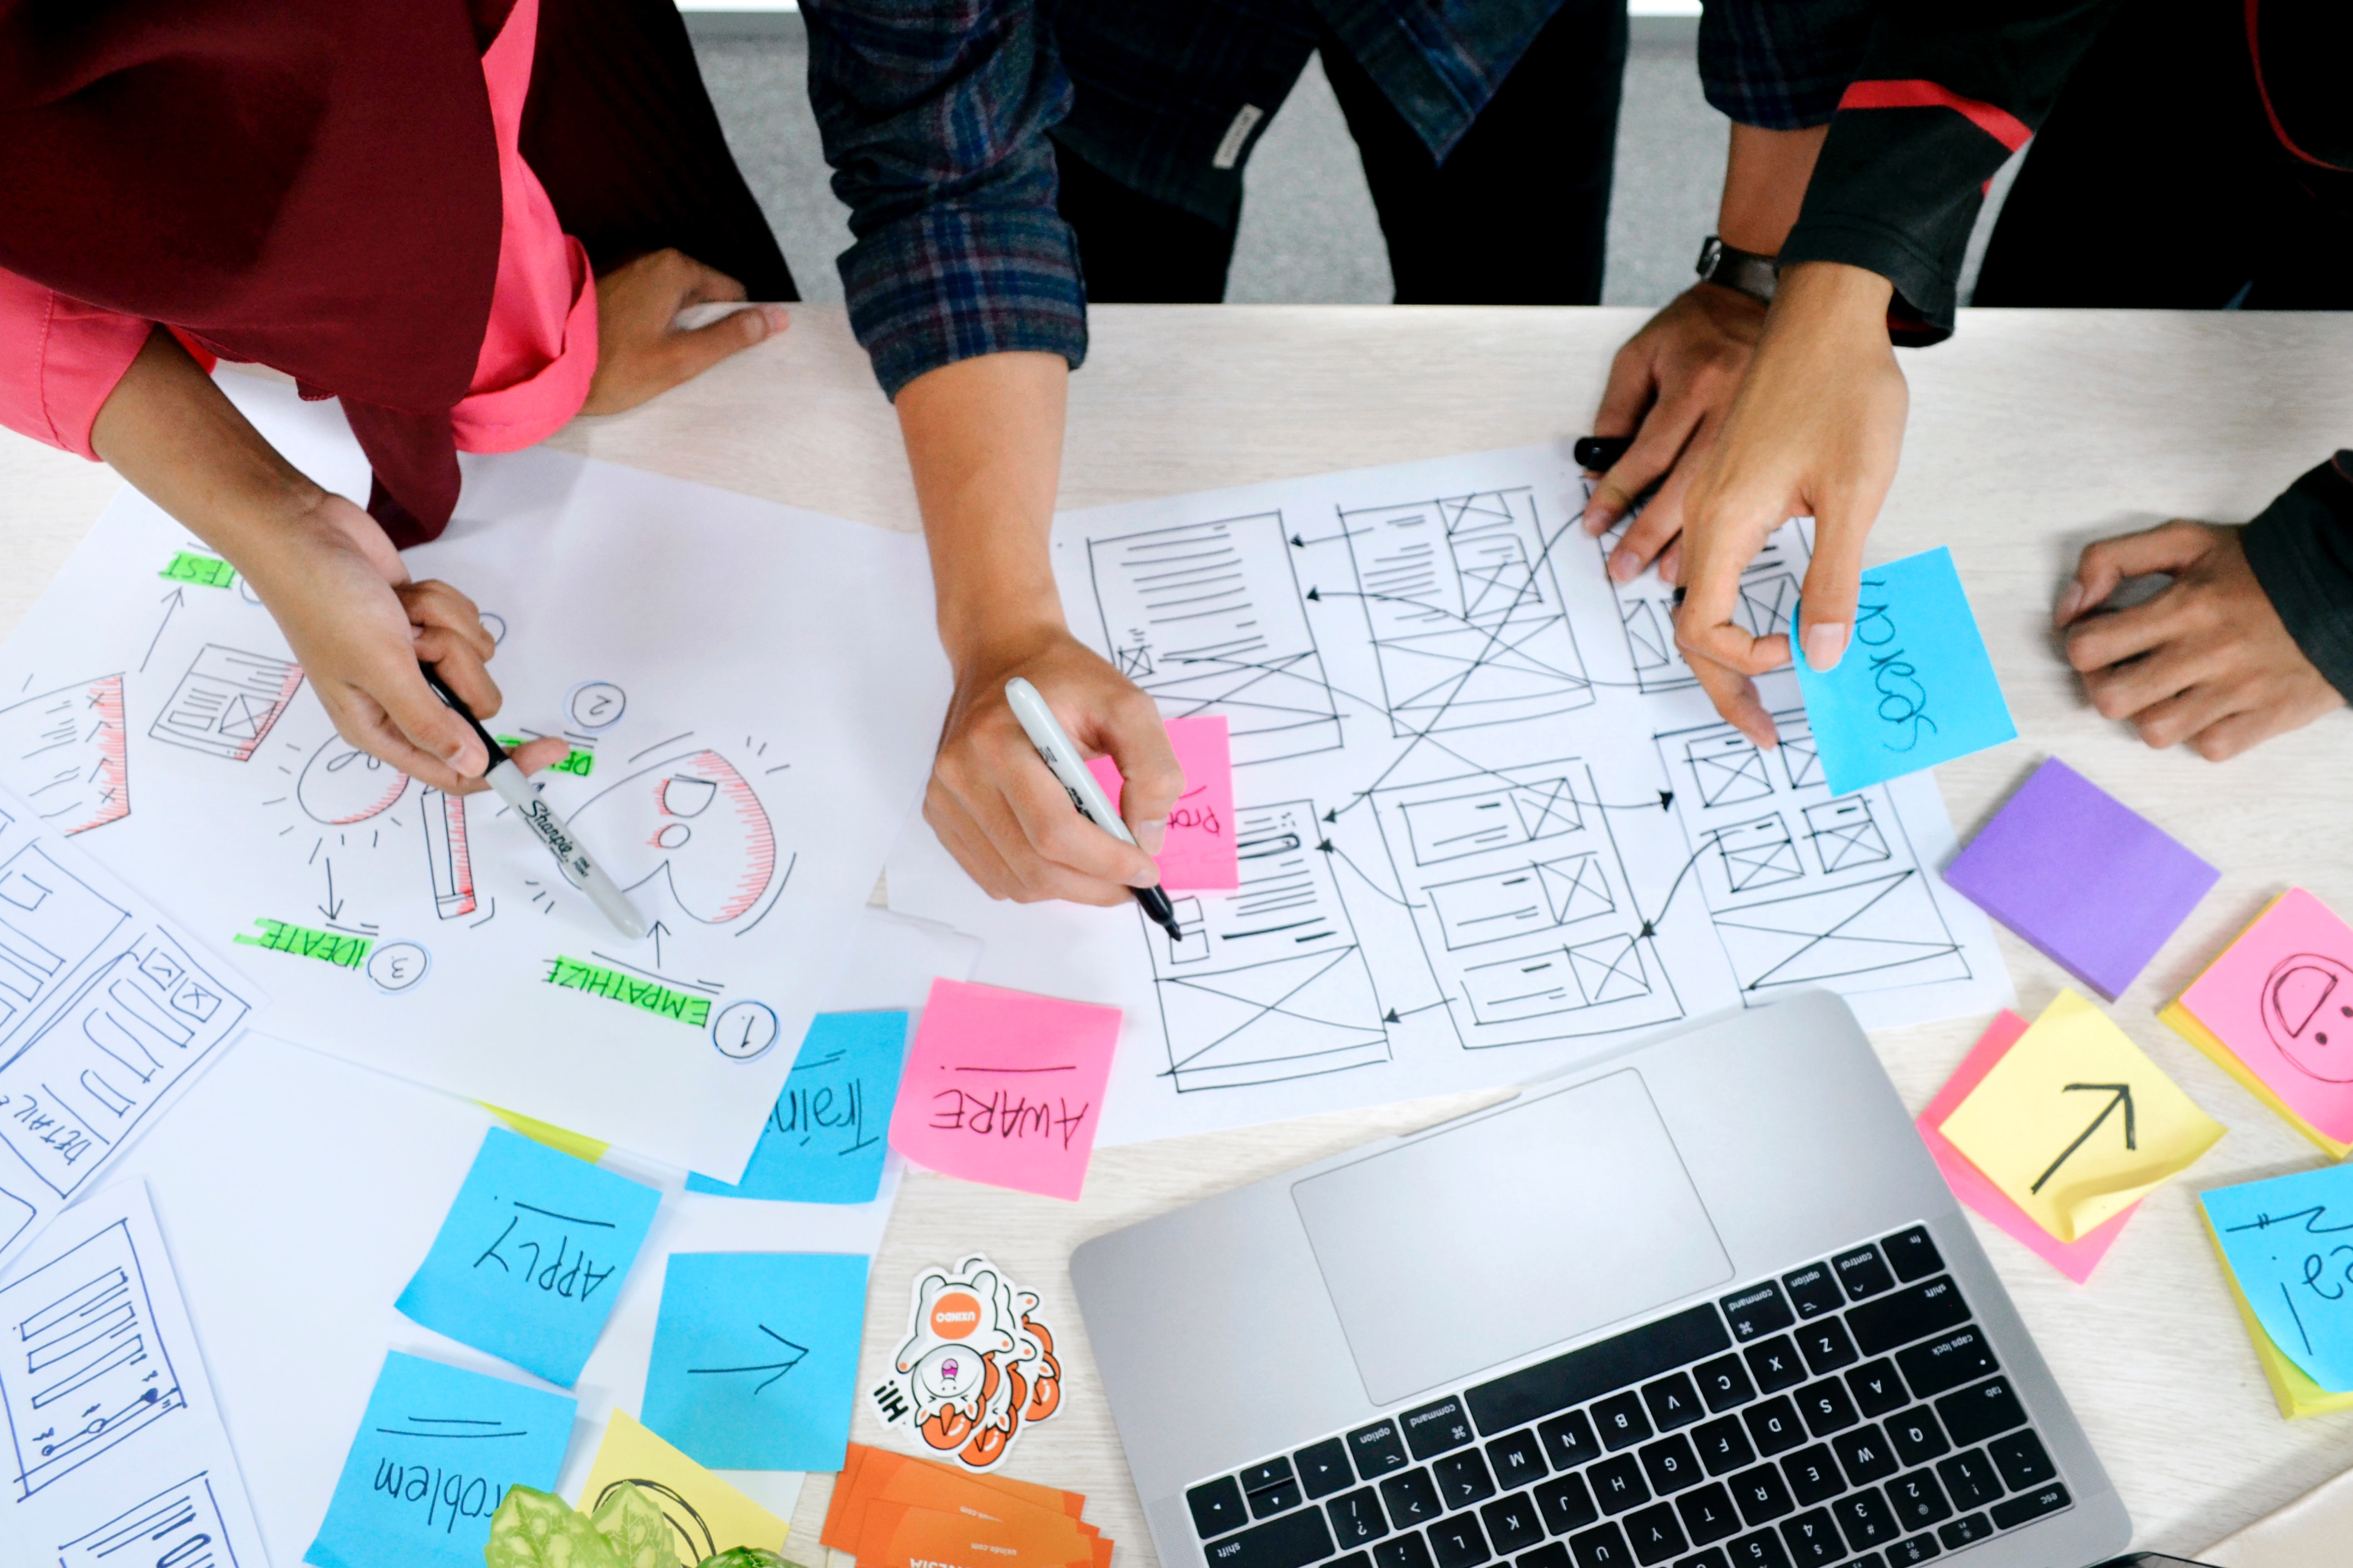 How tech executives may use design thinking?s